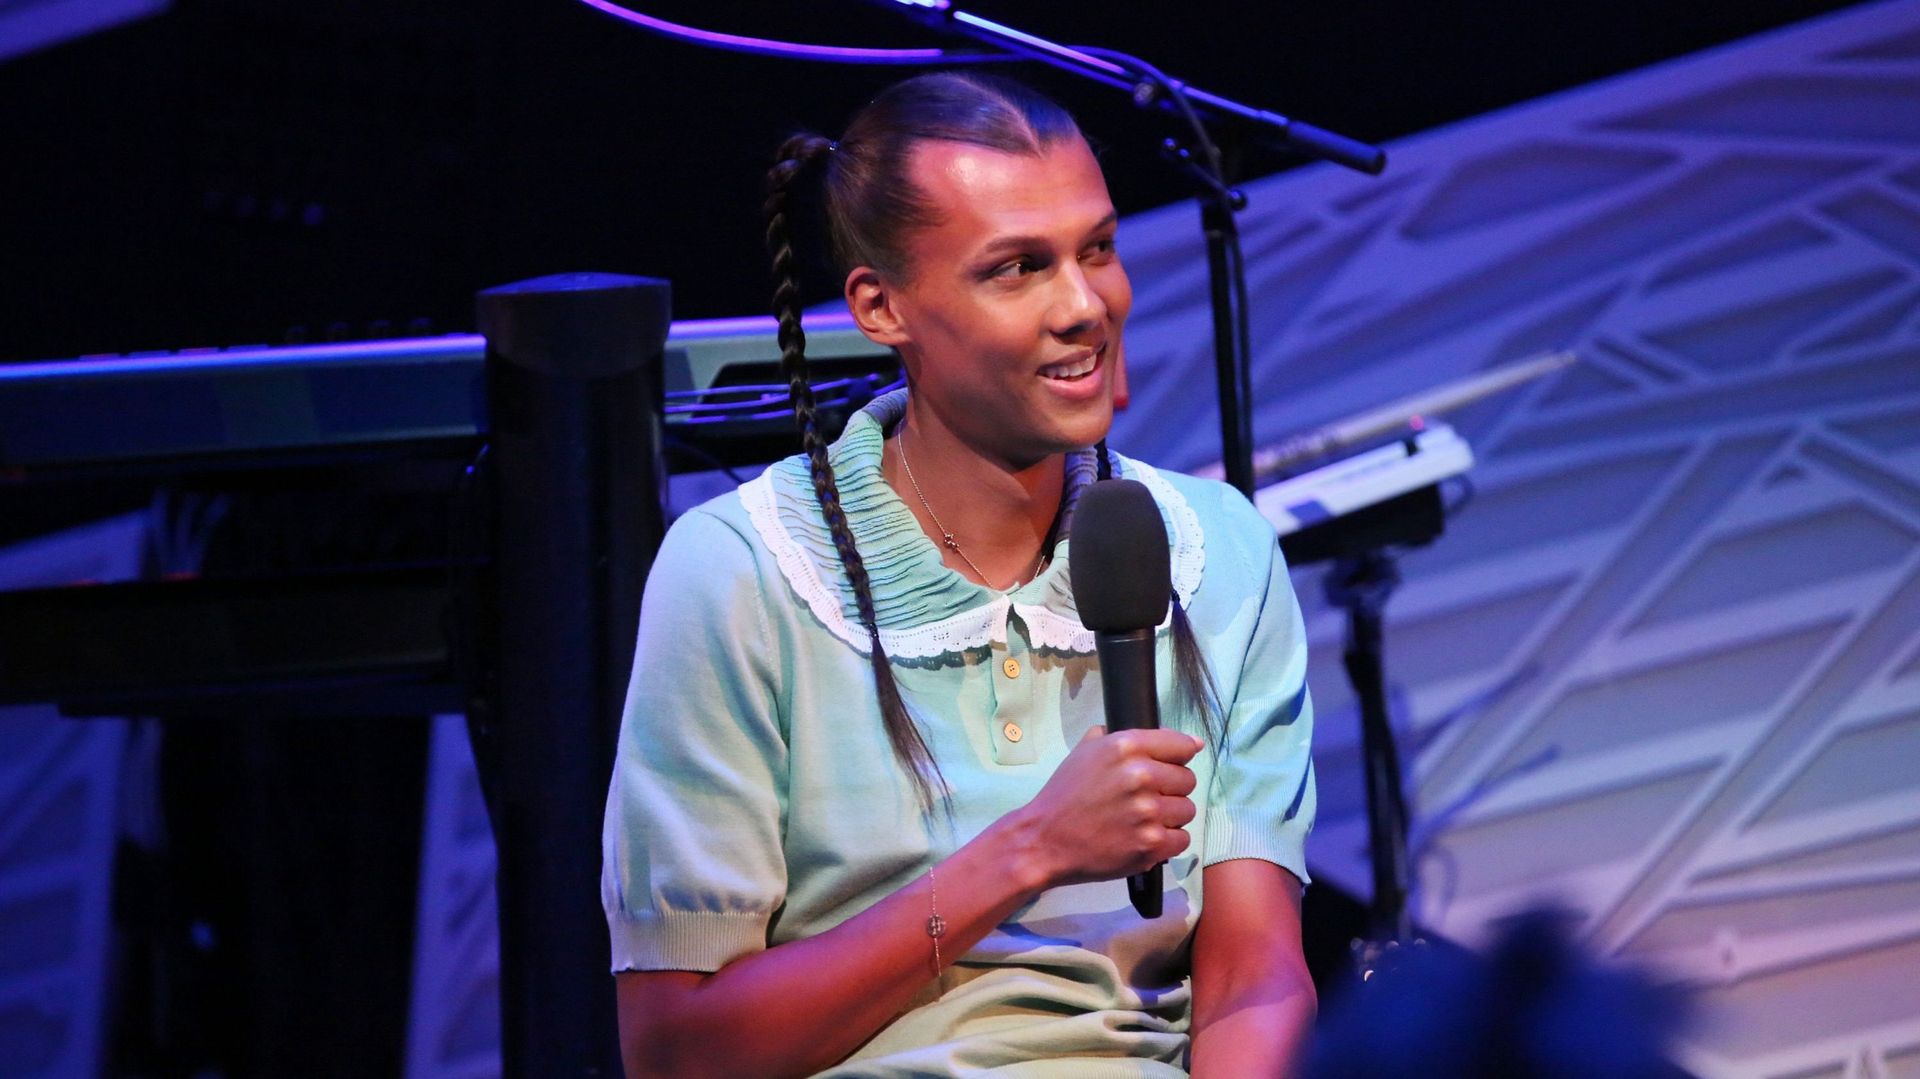 A New York Evening With Stromae" at National Sawdust on November 17, 2022 in New York City.